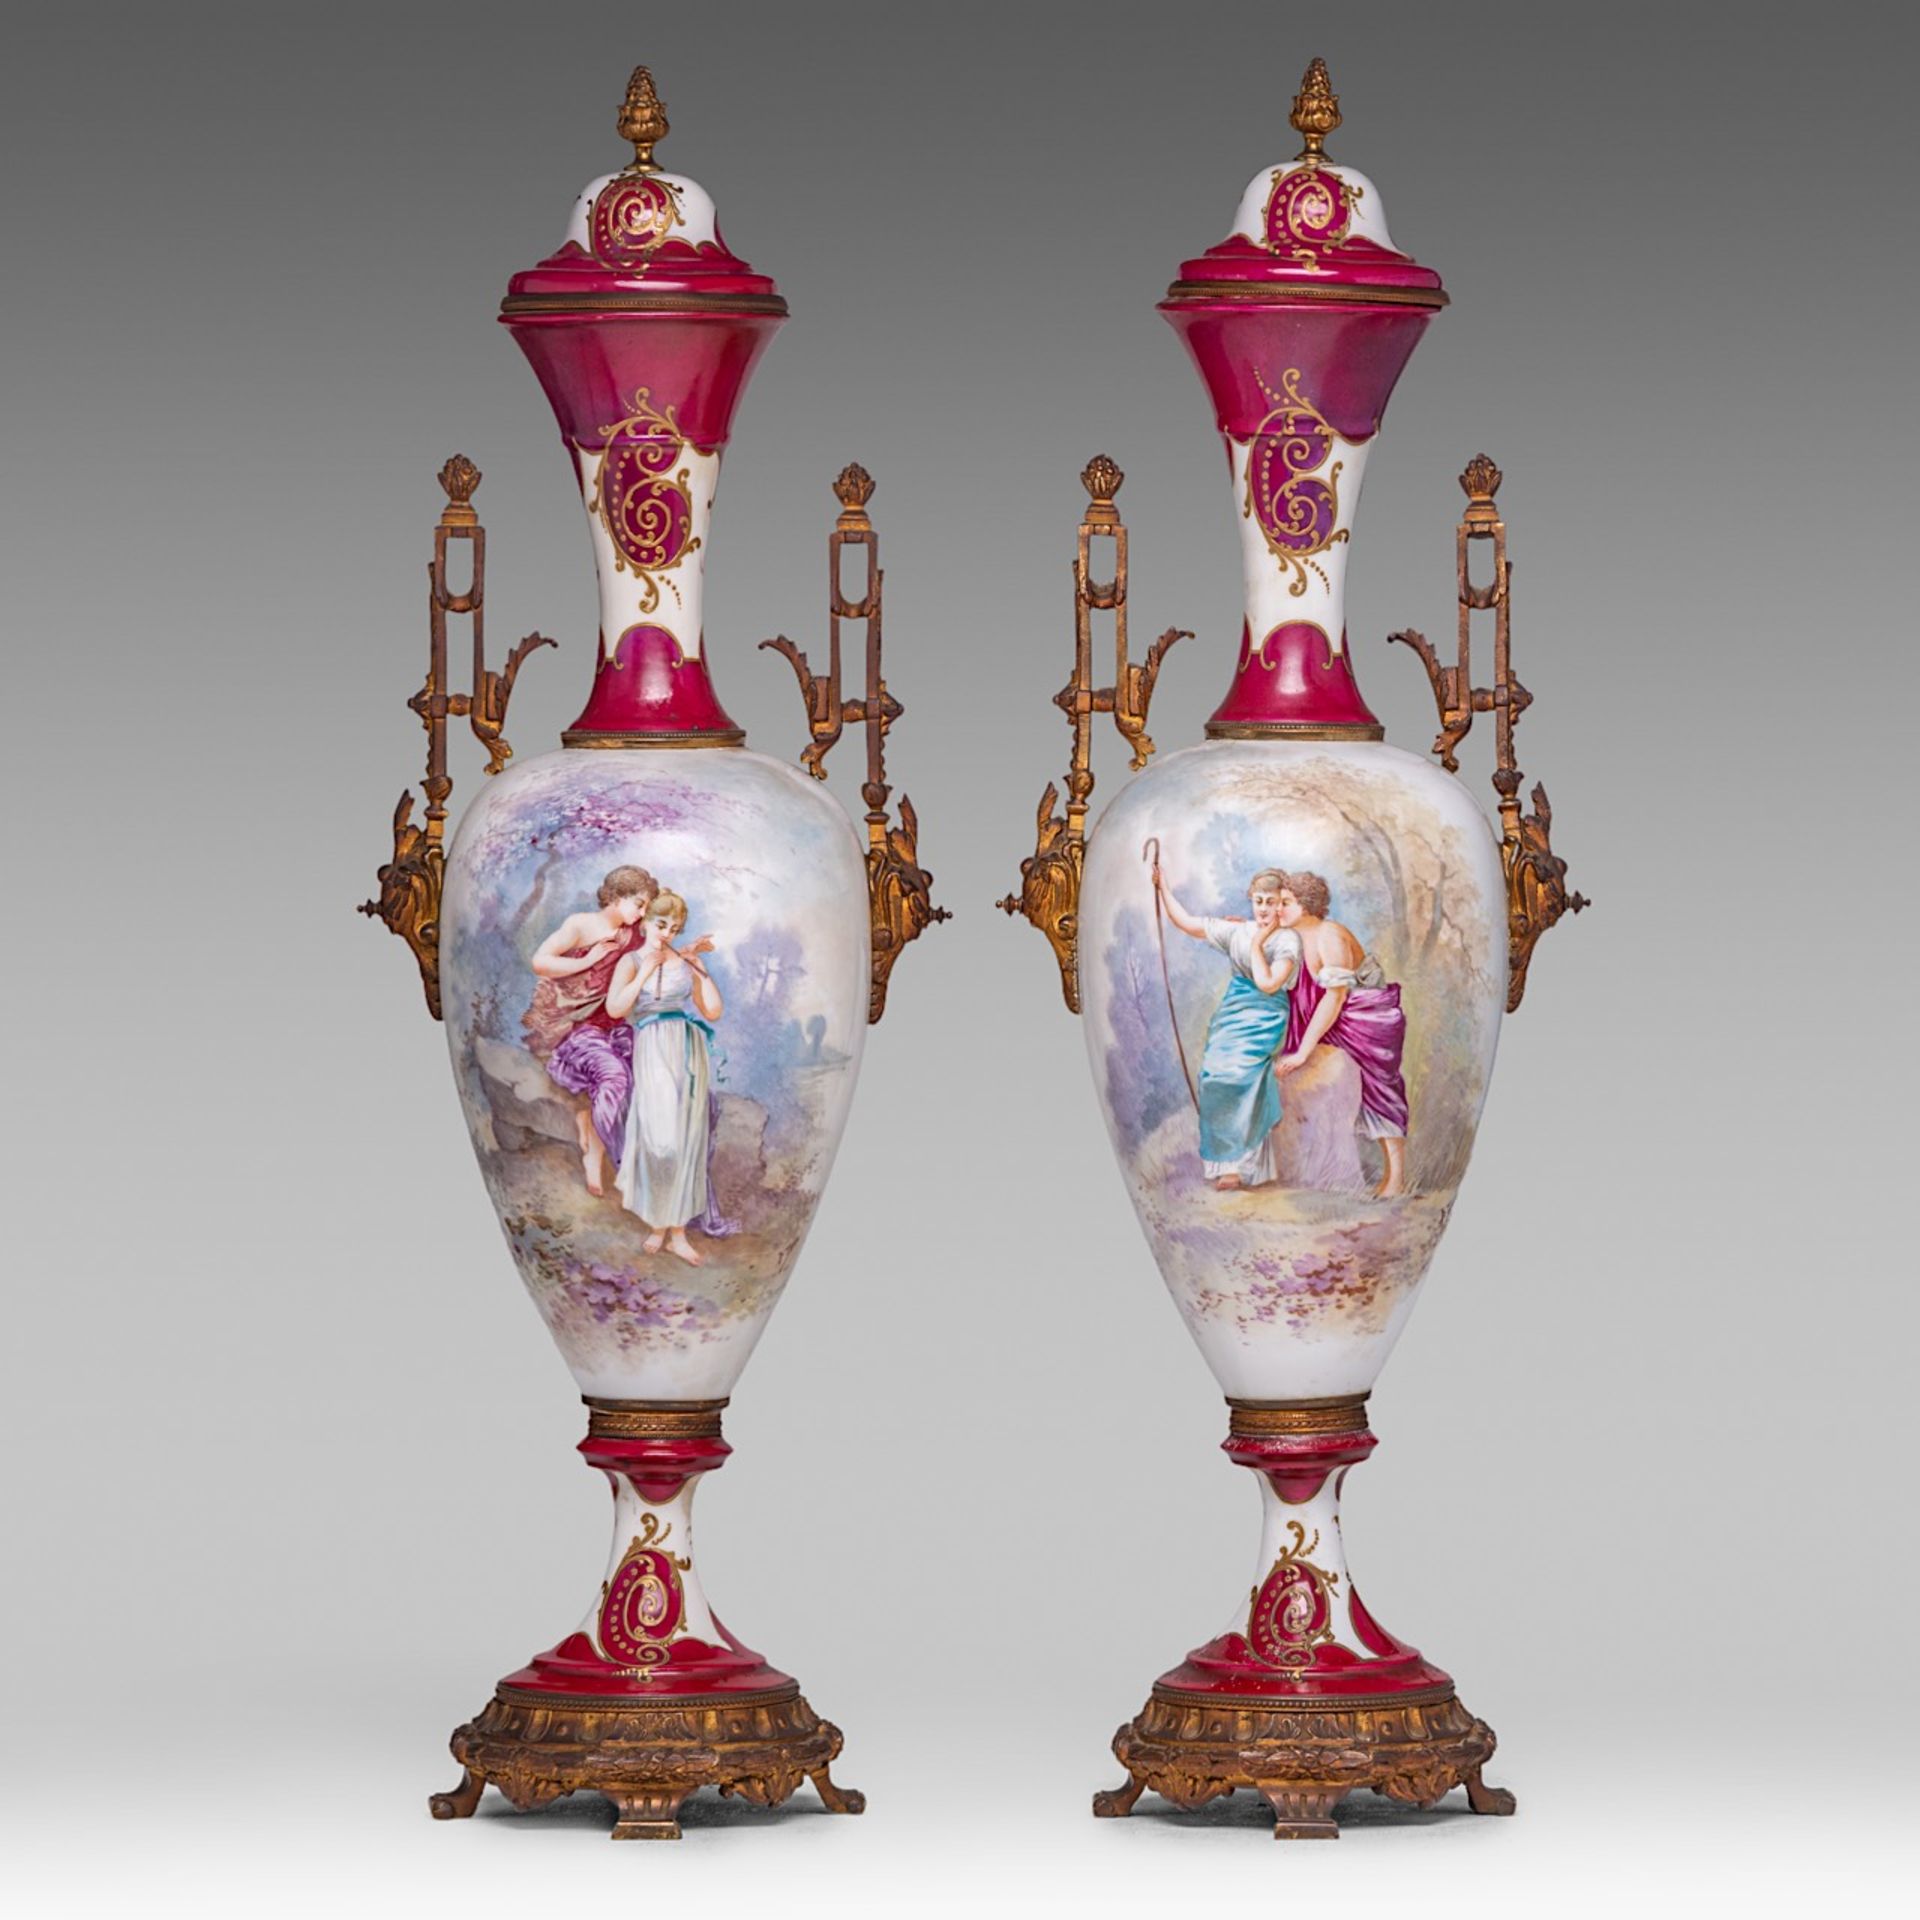 A pair of Sevres porcelain Neoclassical vases, with hand-painted romantic scenes, H 69 cm